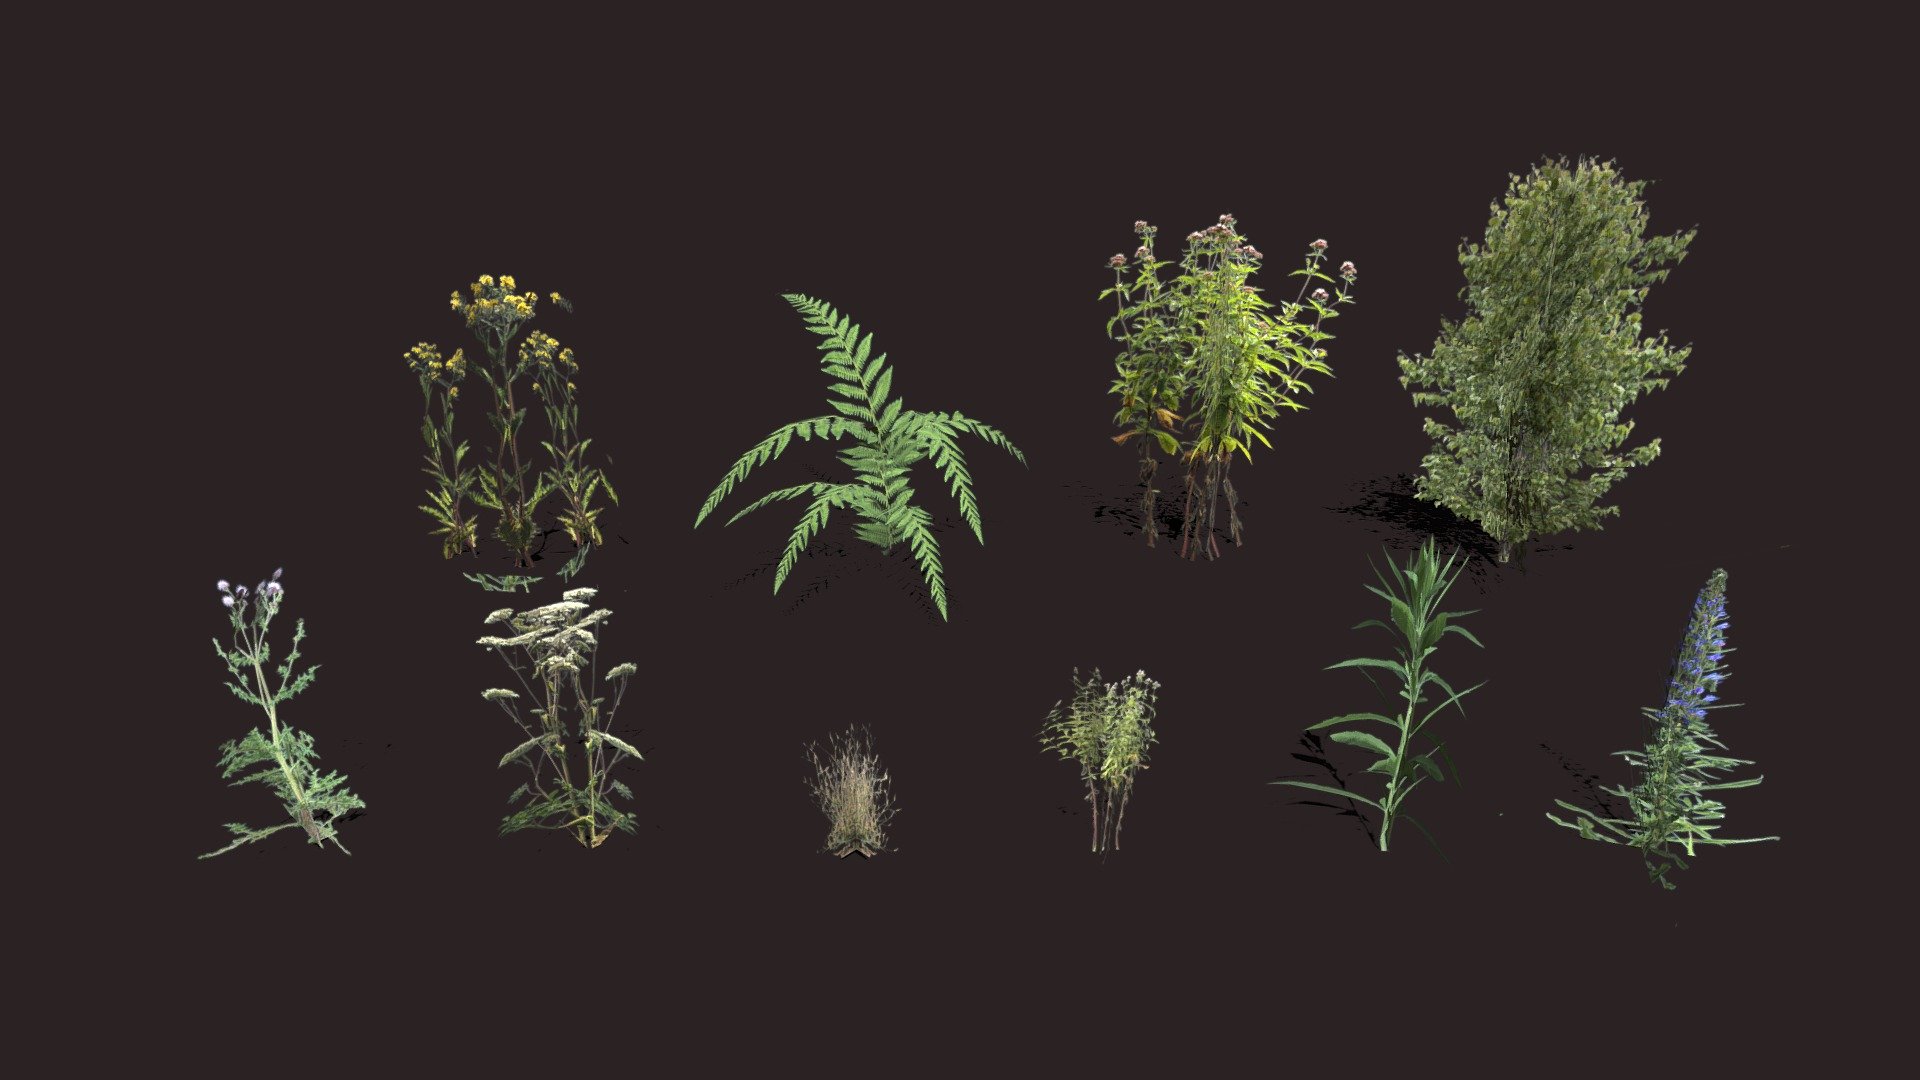 Lowpoly Plants Pack 3D model

Made in blender3D v2.81

Texture :4741*3105 Diffuse, Normal and Height maps.

Polycount: 539 Verts | 262 Polygon/faces |538 Tris 3d model